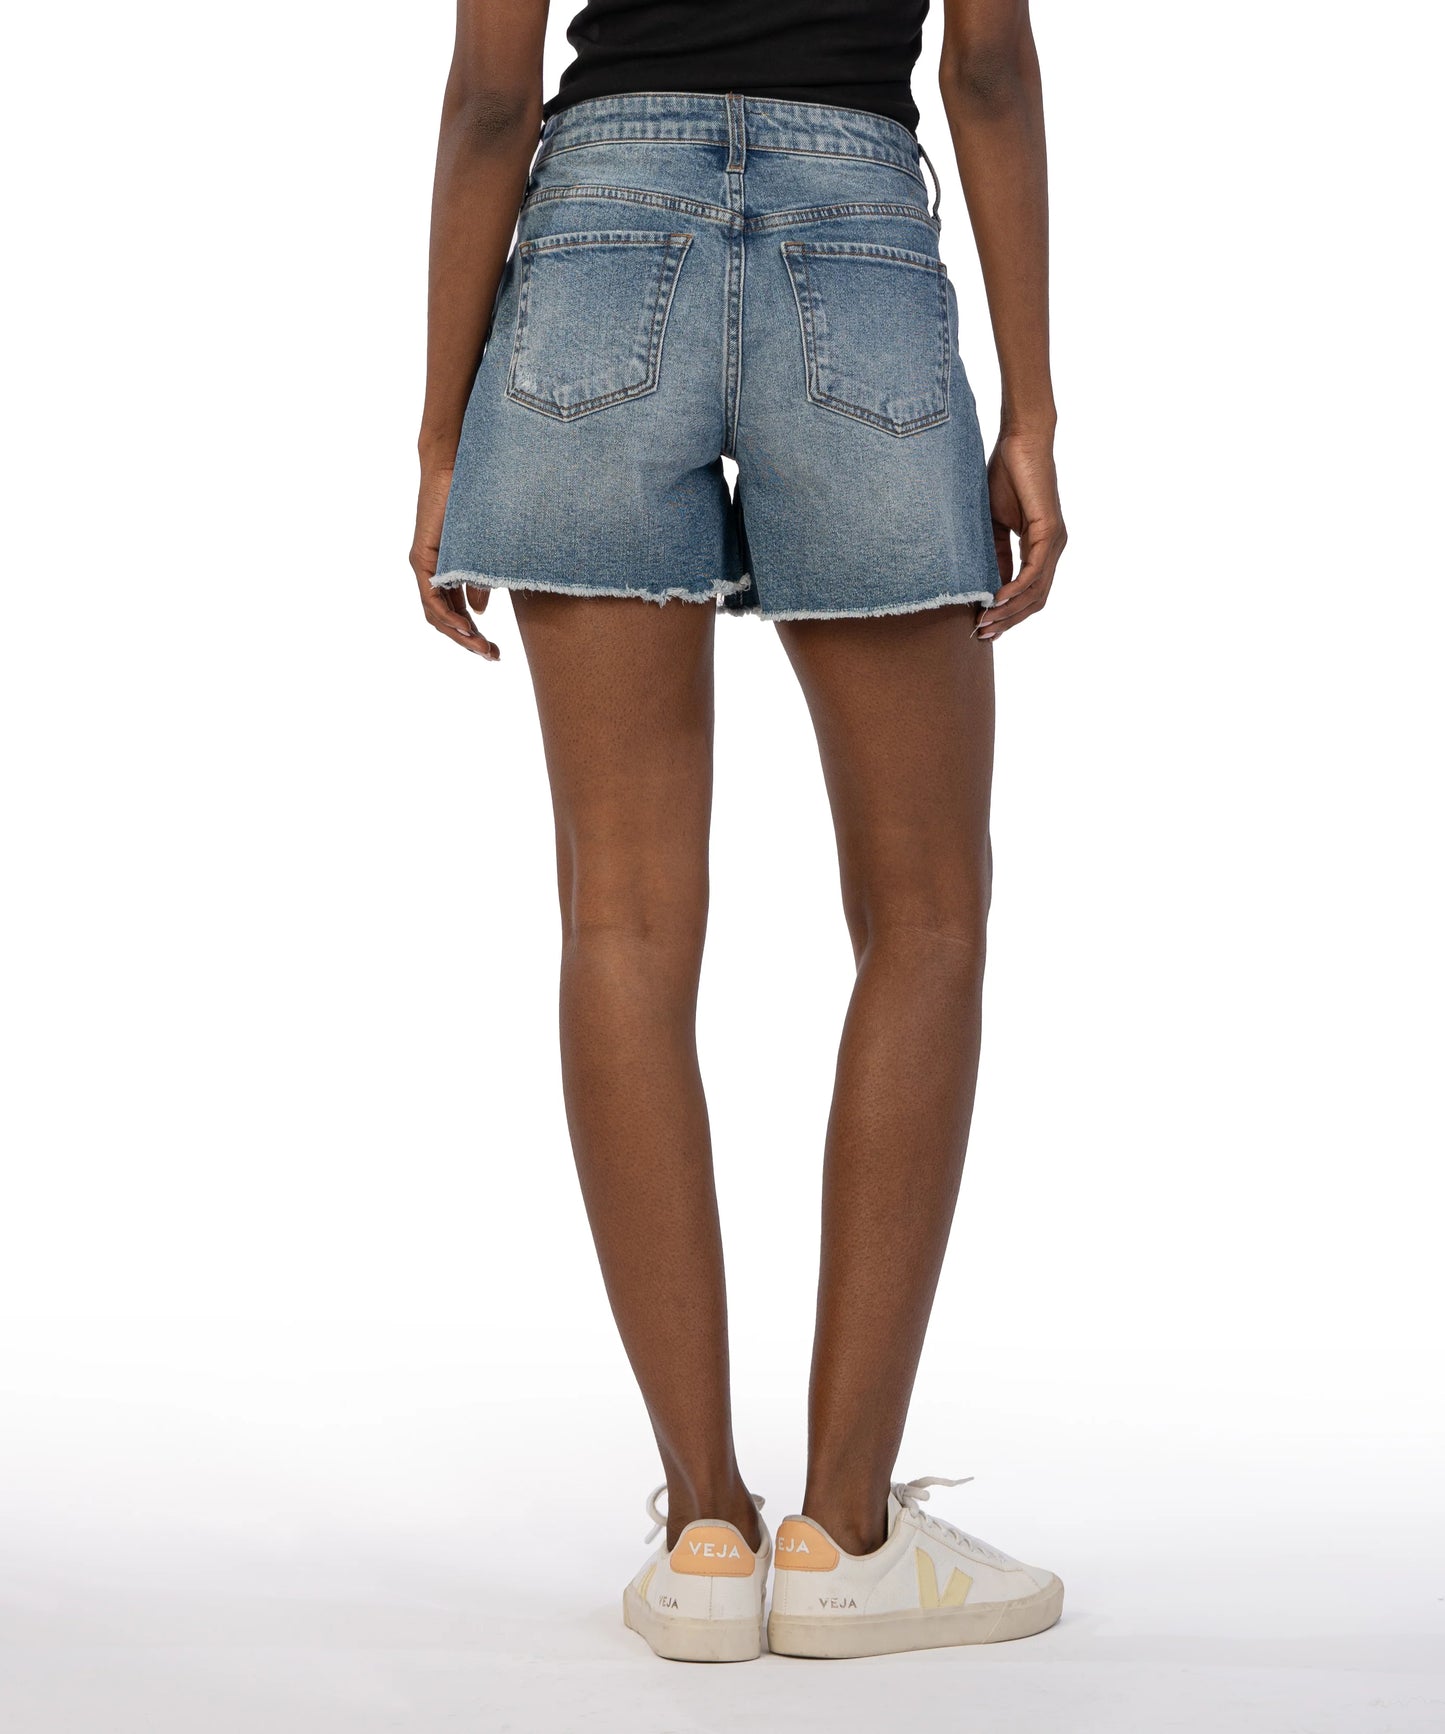 Kut from the Kloth Jane High Rise Short